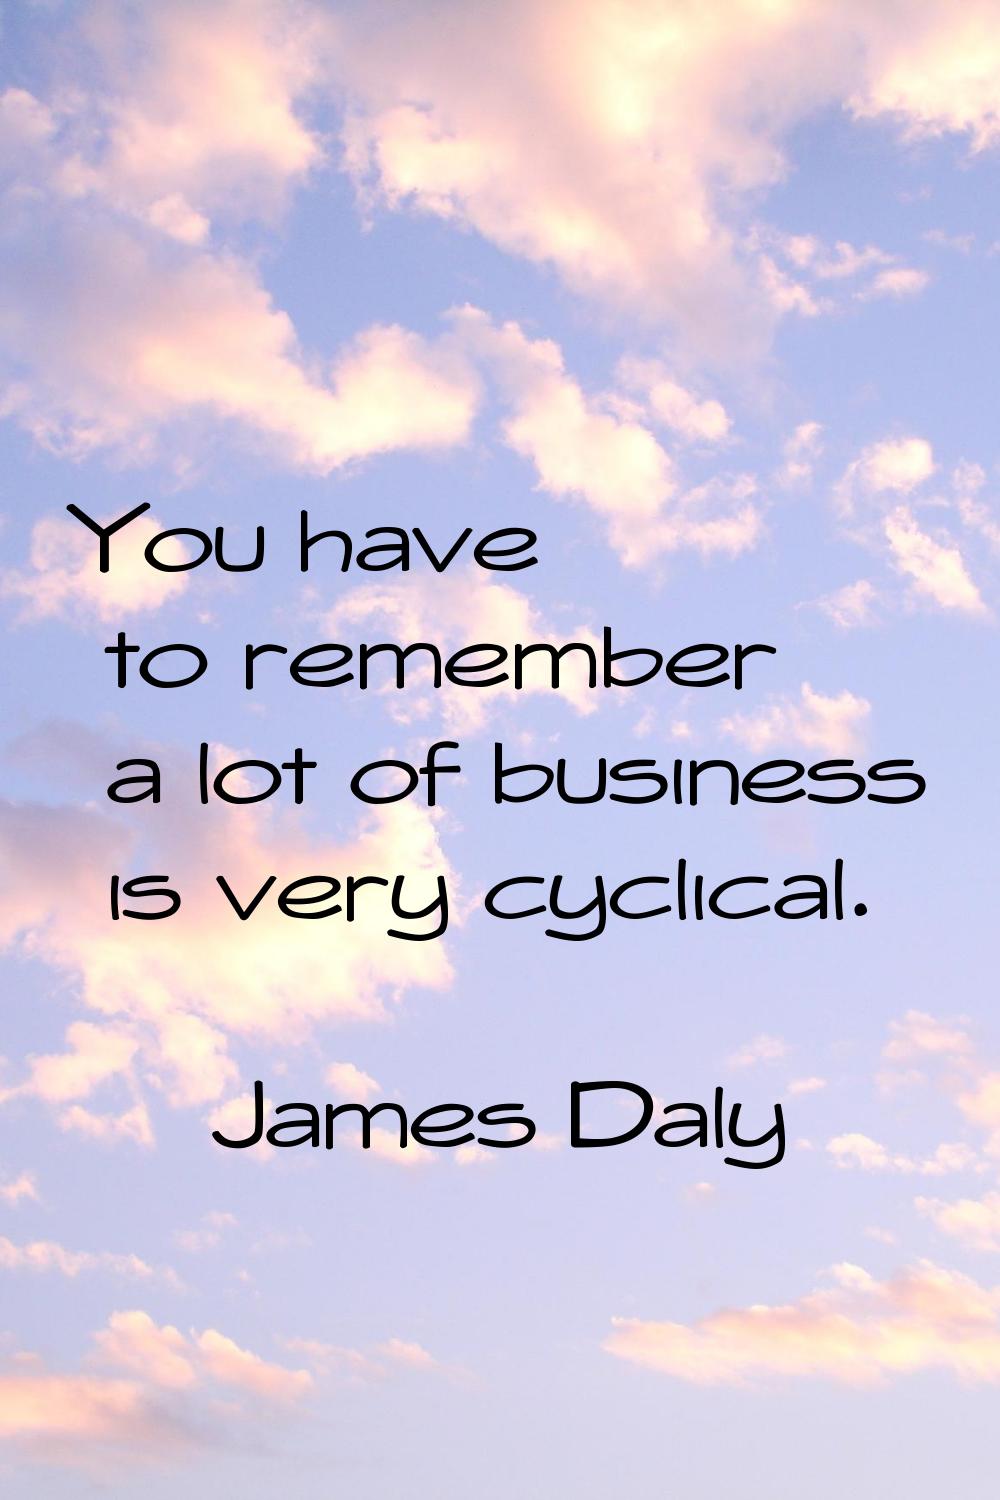 You have to remember a lot of business is very cyclical.